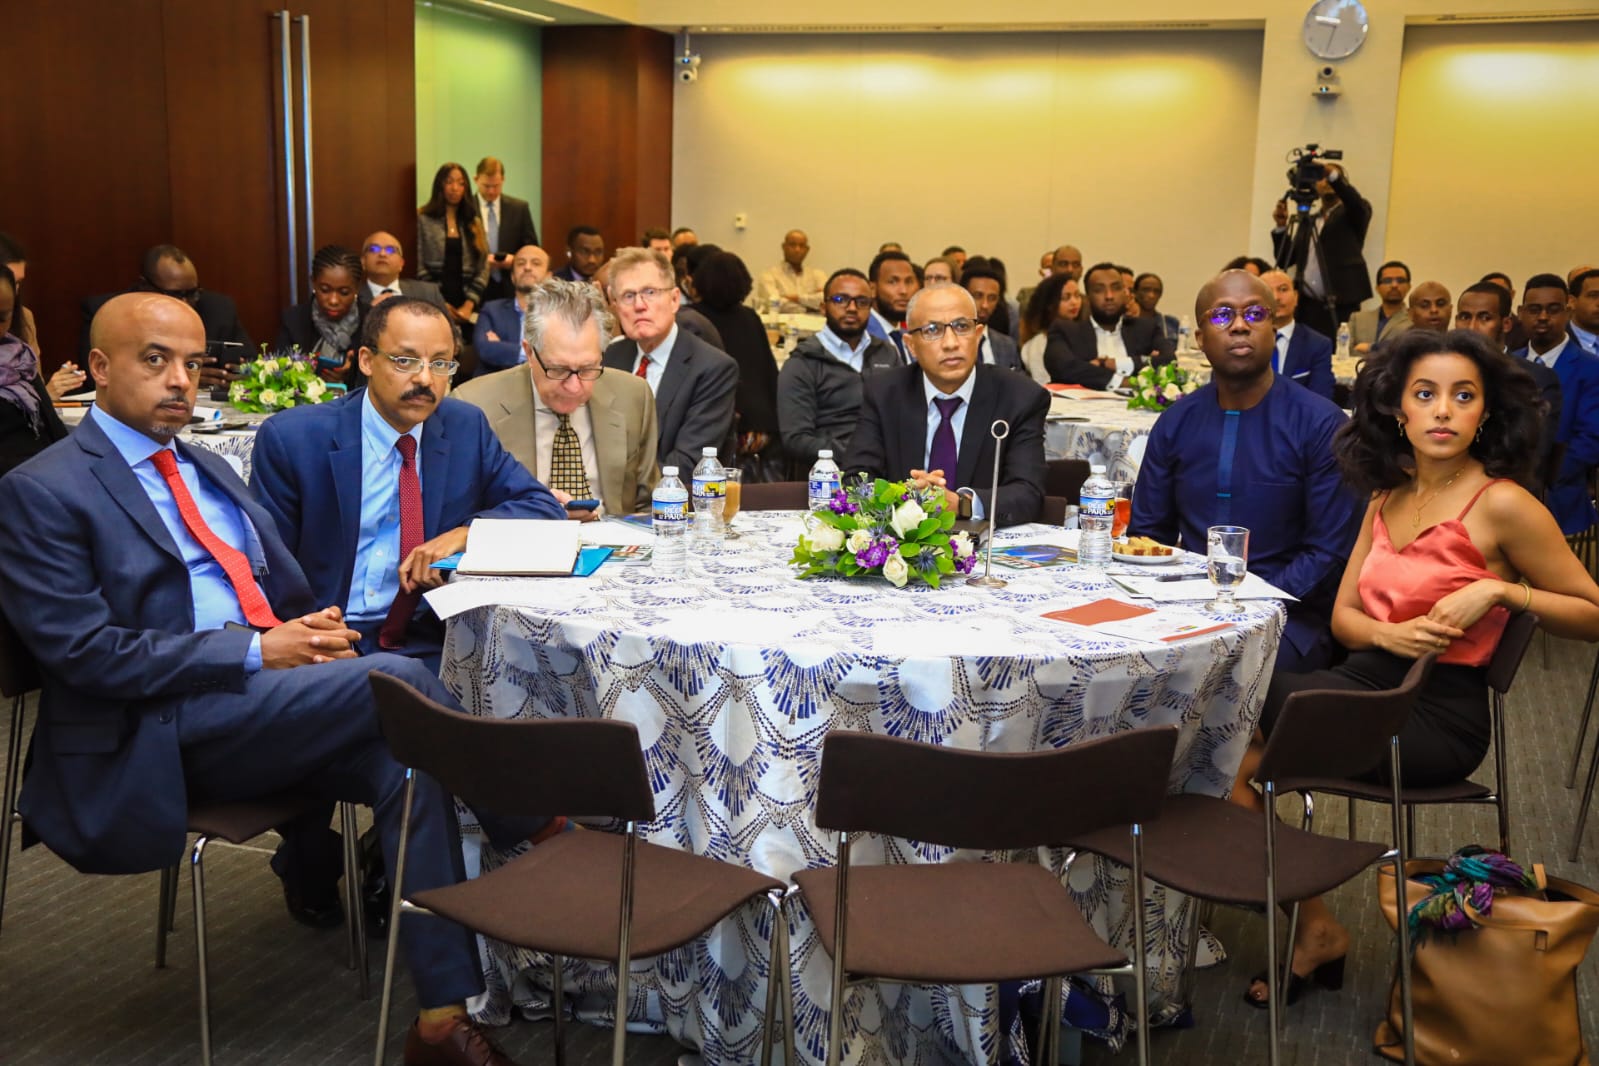 H.E Finance Minister Ahmed Shide, call up on American companies to invest in Ethiopia.